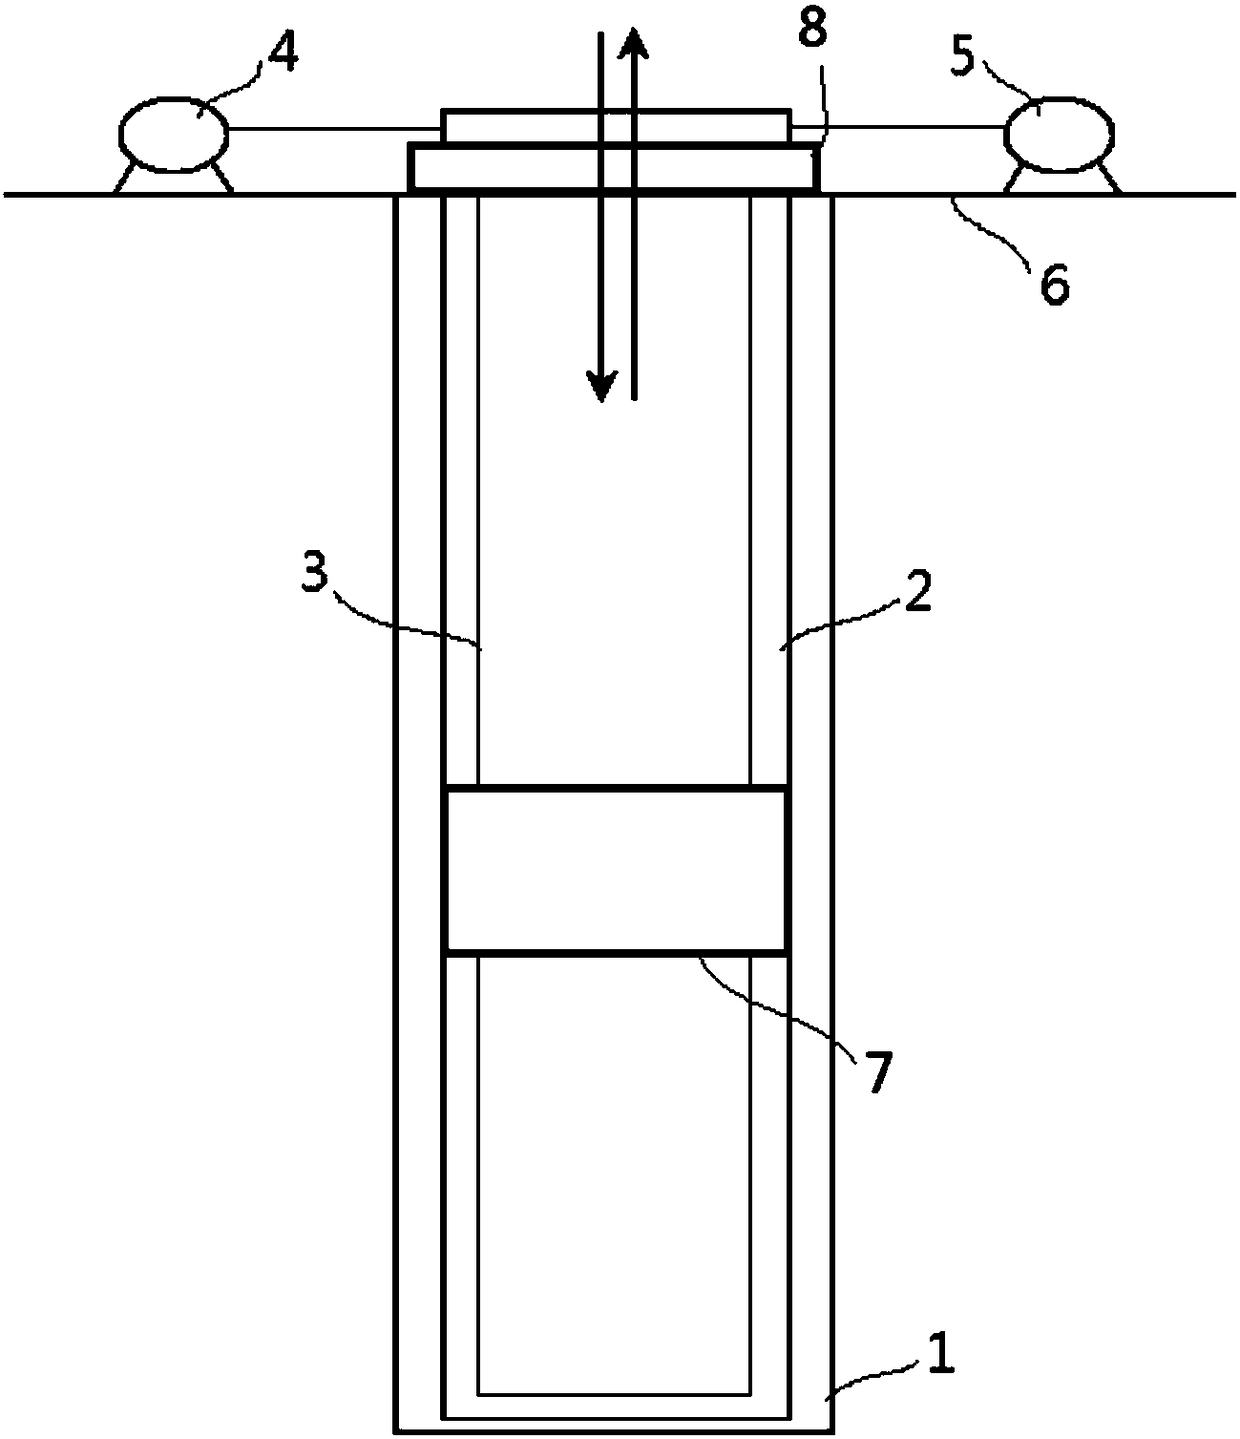 Controllable multifunctional pumping and injecting vertical shaft device for in situ remediation of soil and groundwater